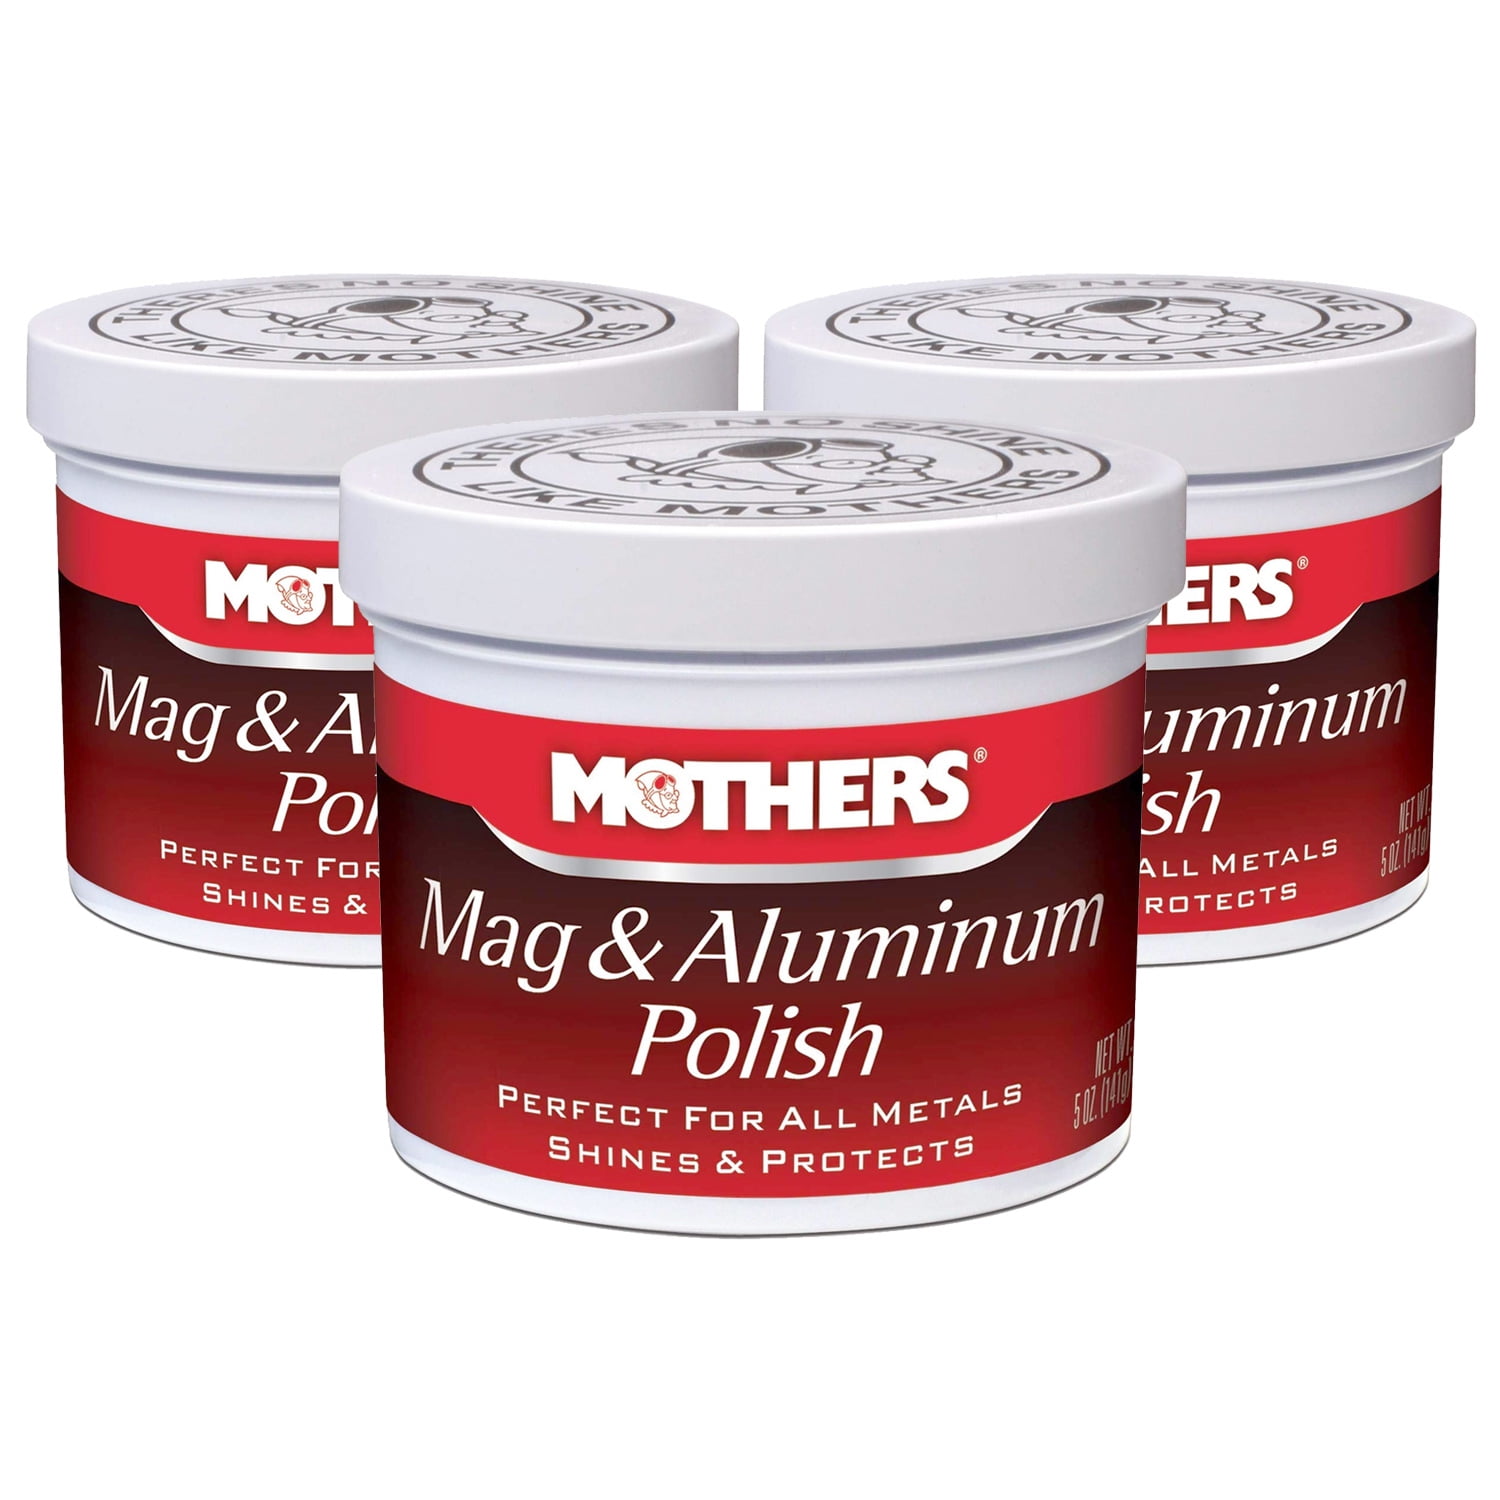 Mag and Aluminum Polish, 8.0 Ounce Net Weight, 3M